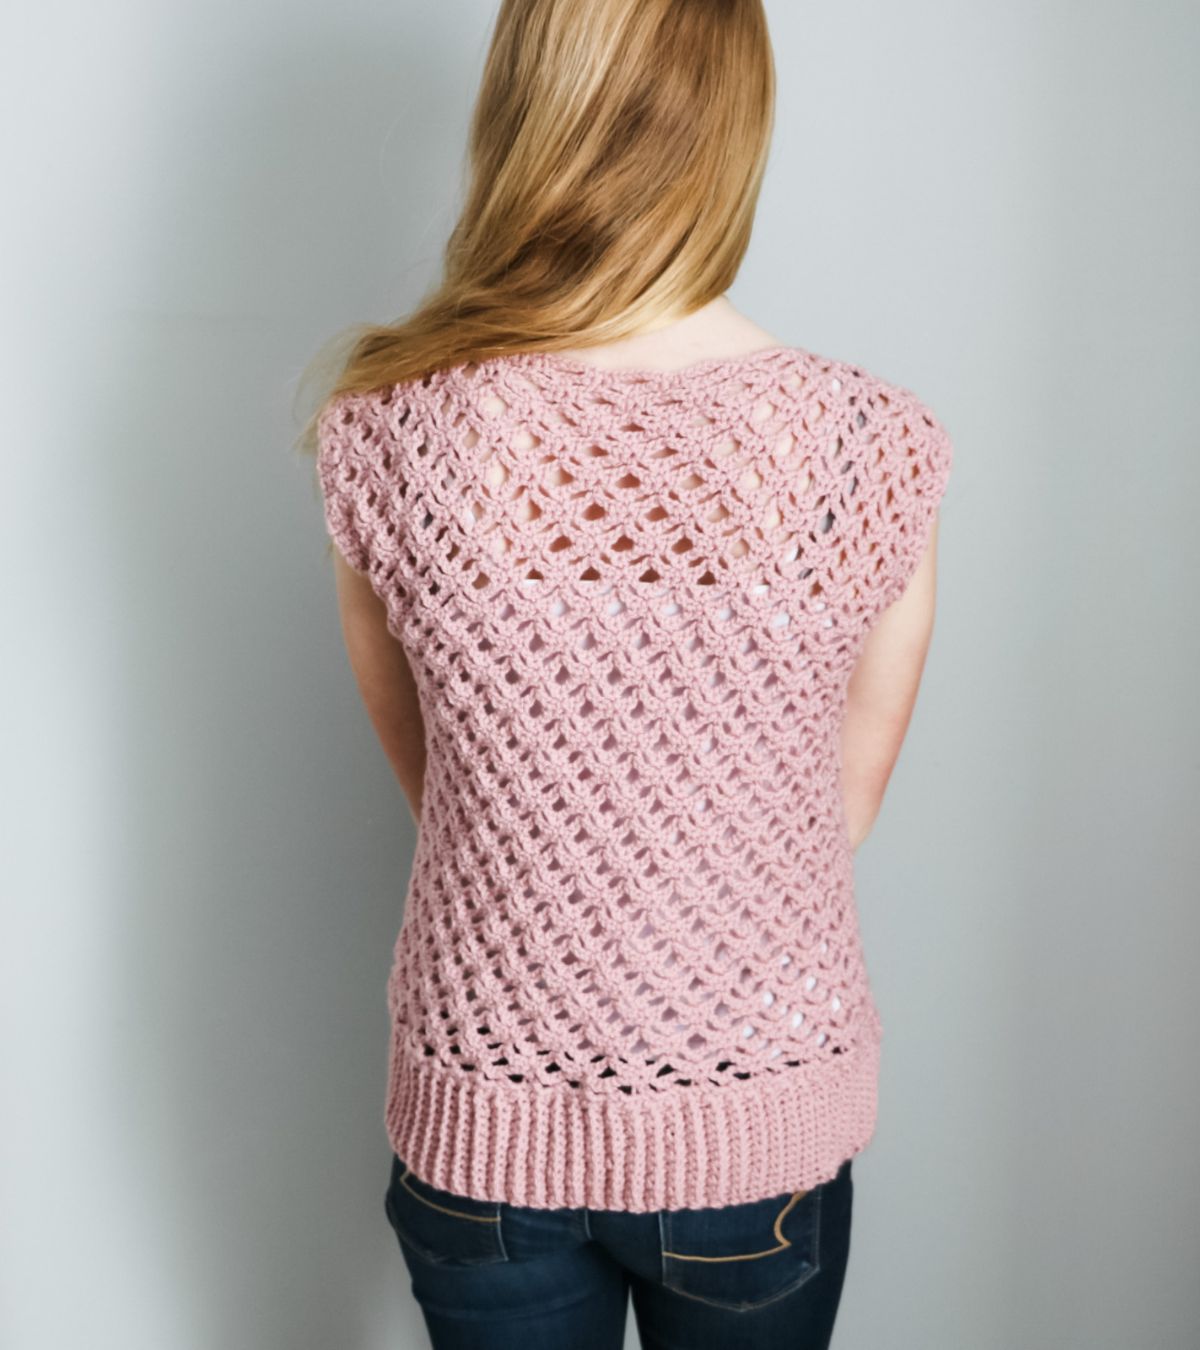 Modern Lace Pullover - MJ's off the Hook Designs